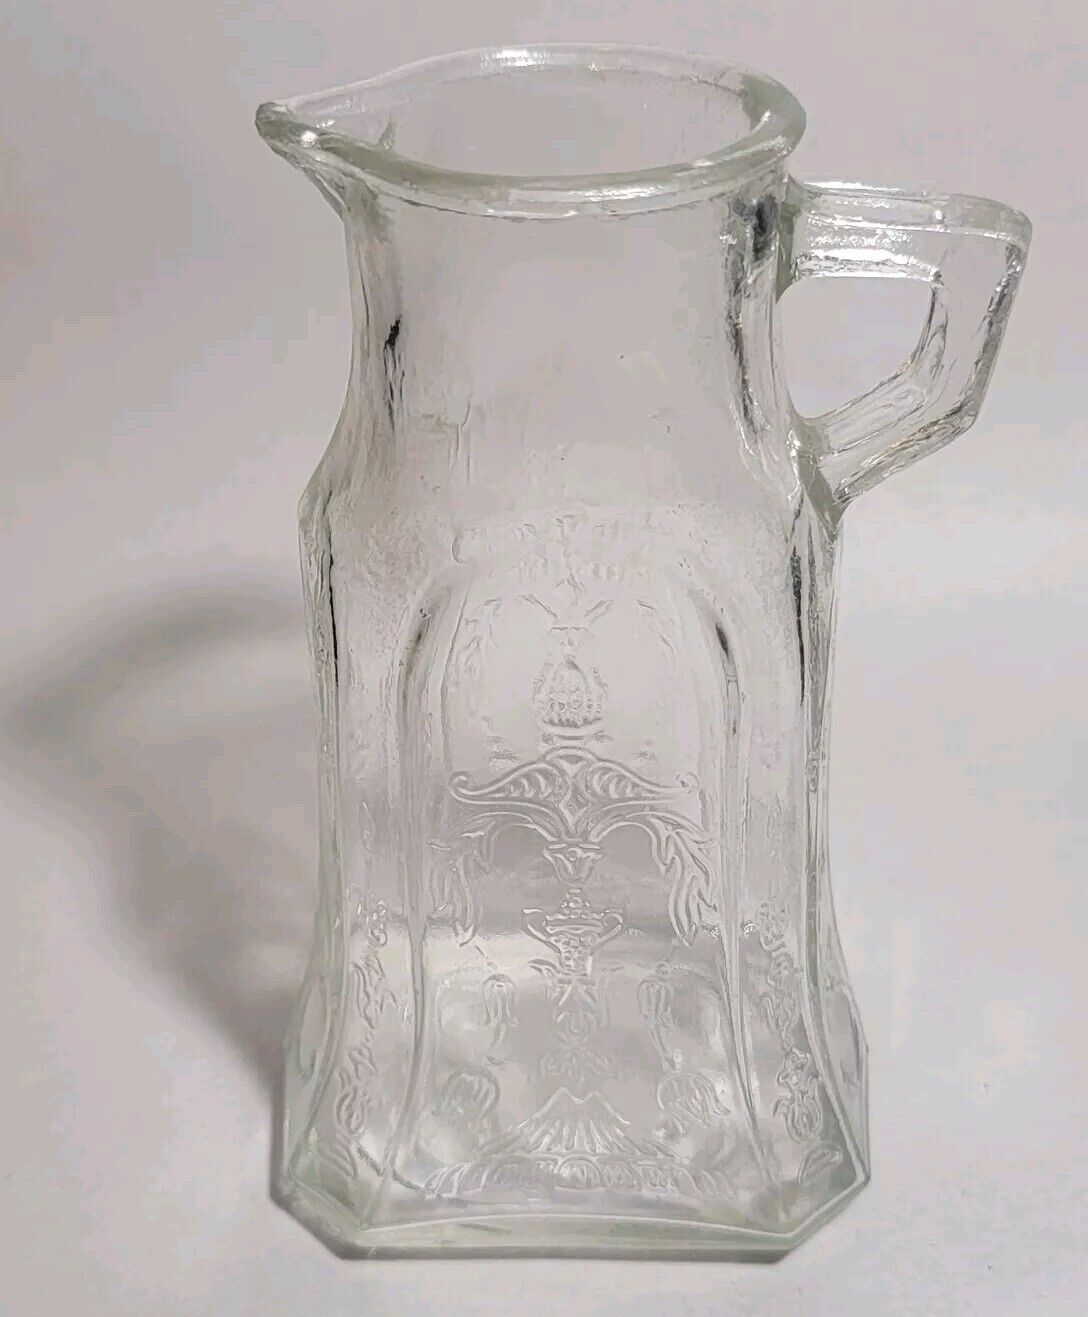 Nice Vintage Clear Glass Pitcher or Creamer w/ Raised Ornate Art Deco Designs 